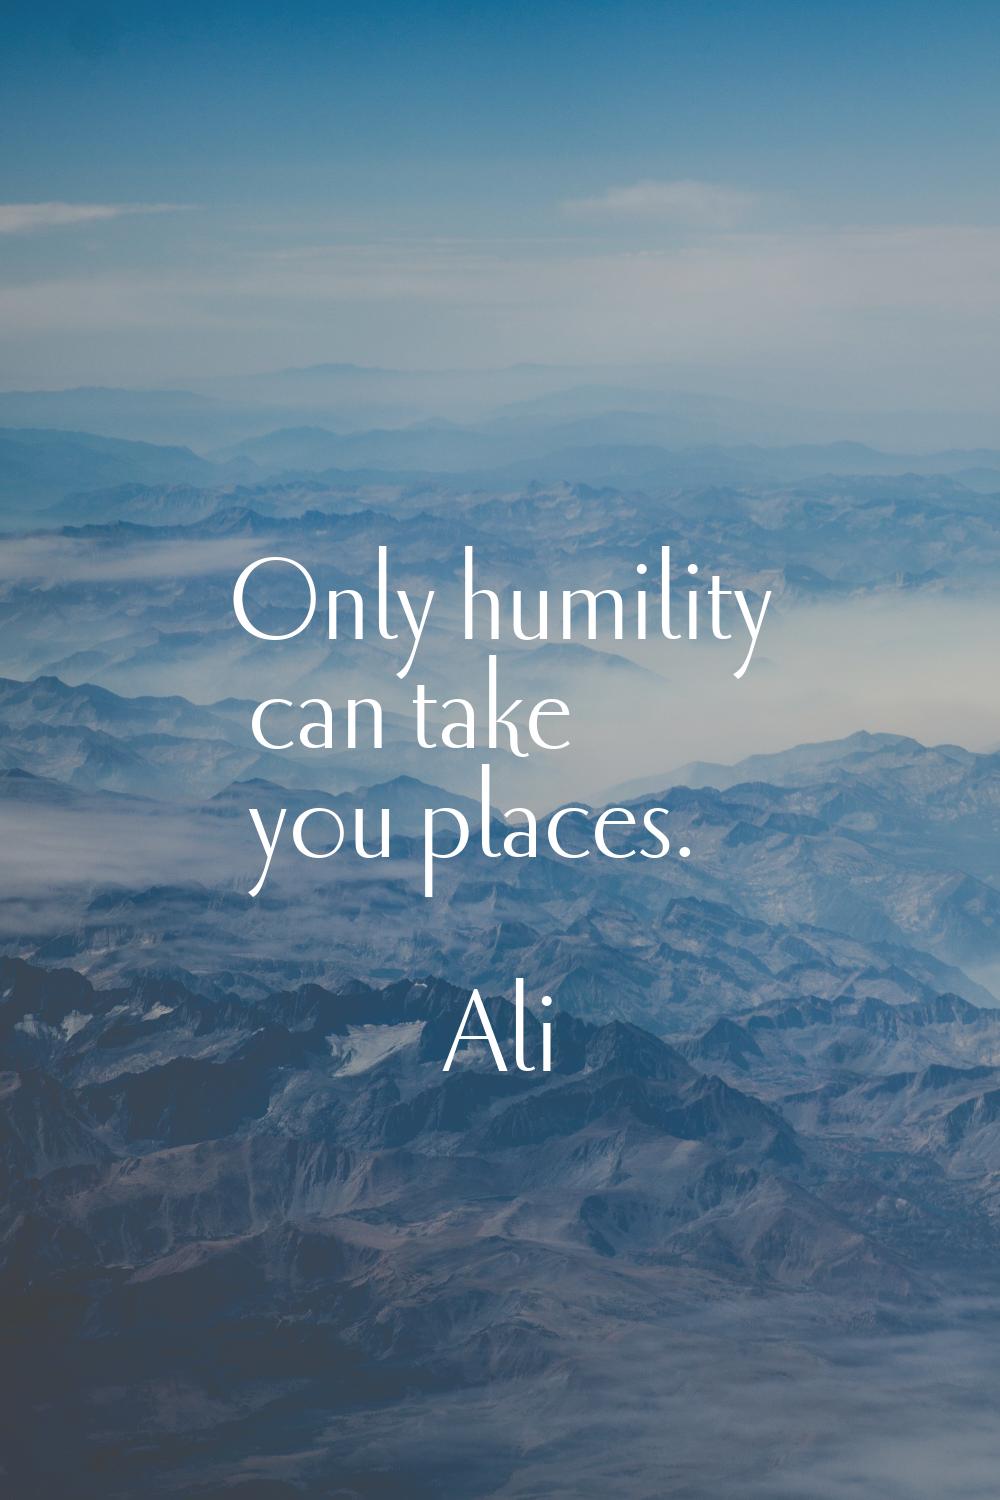 Only humility can take you places.